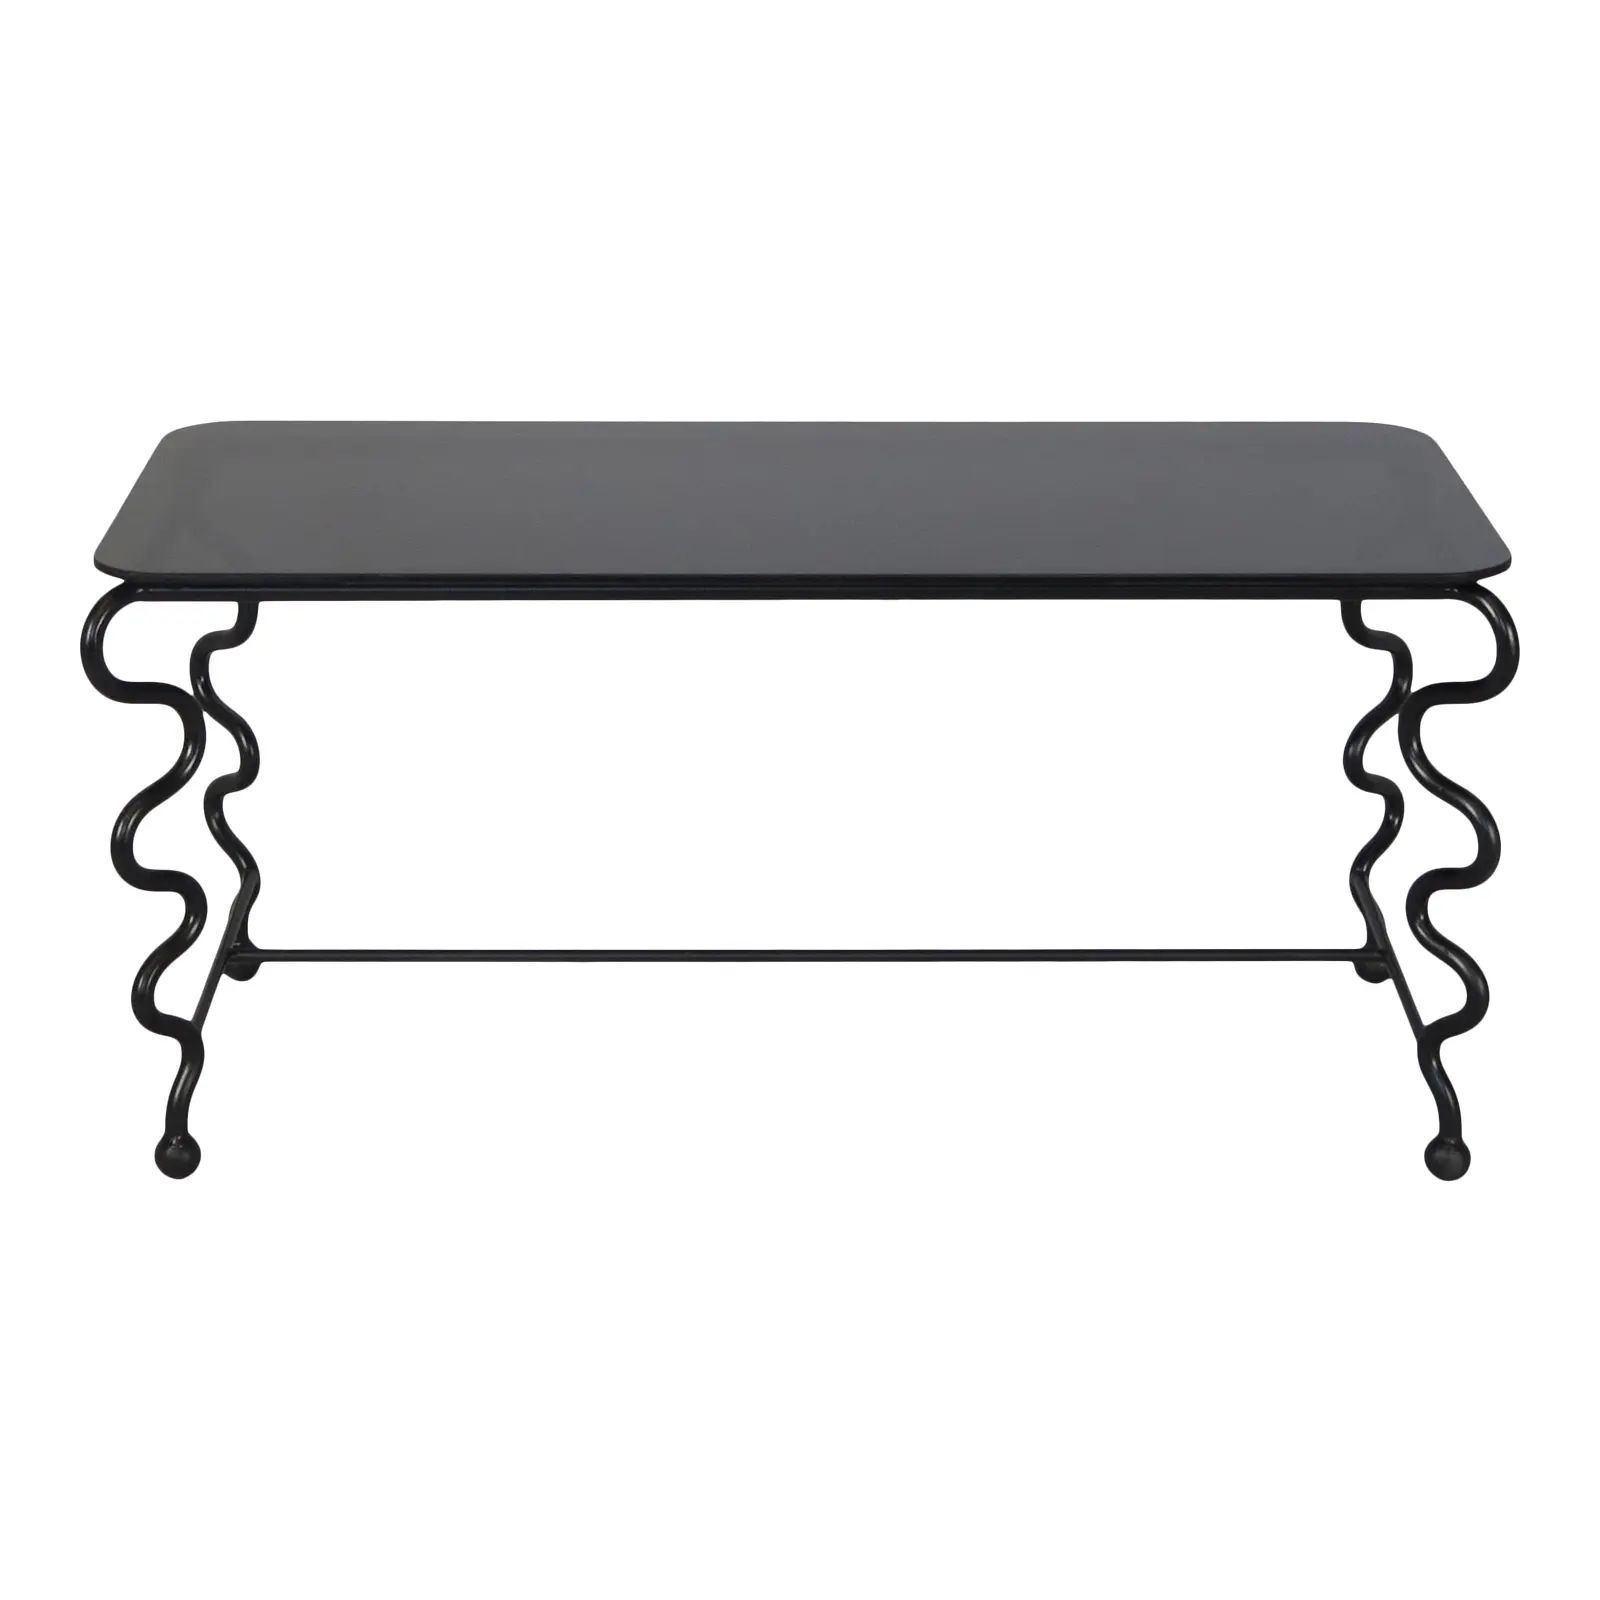 'Serpentine' Coffee Table With Black Glass Top | Chairish